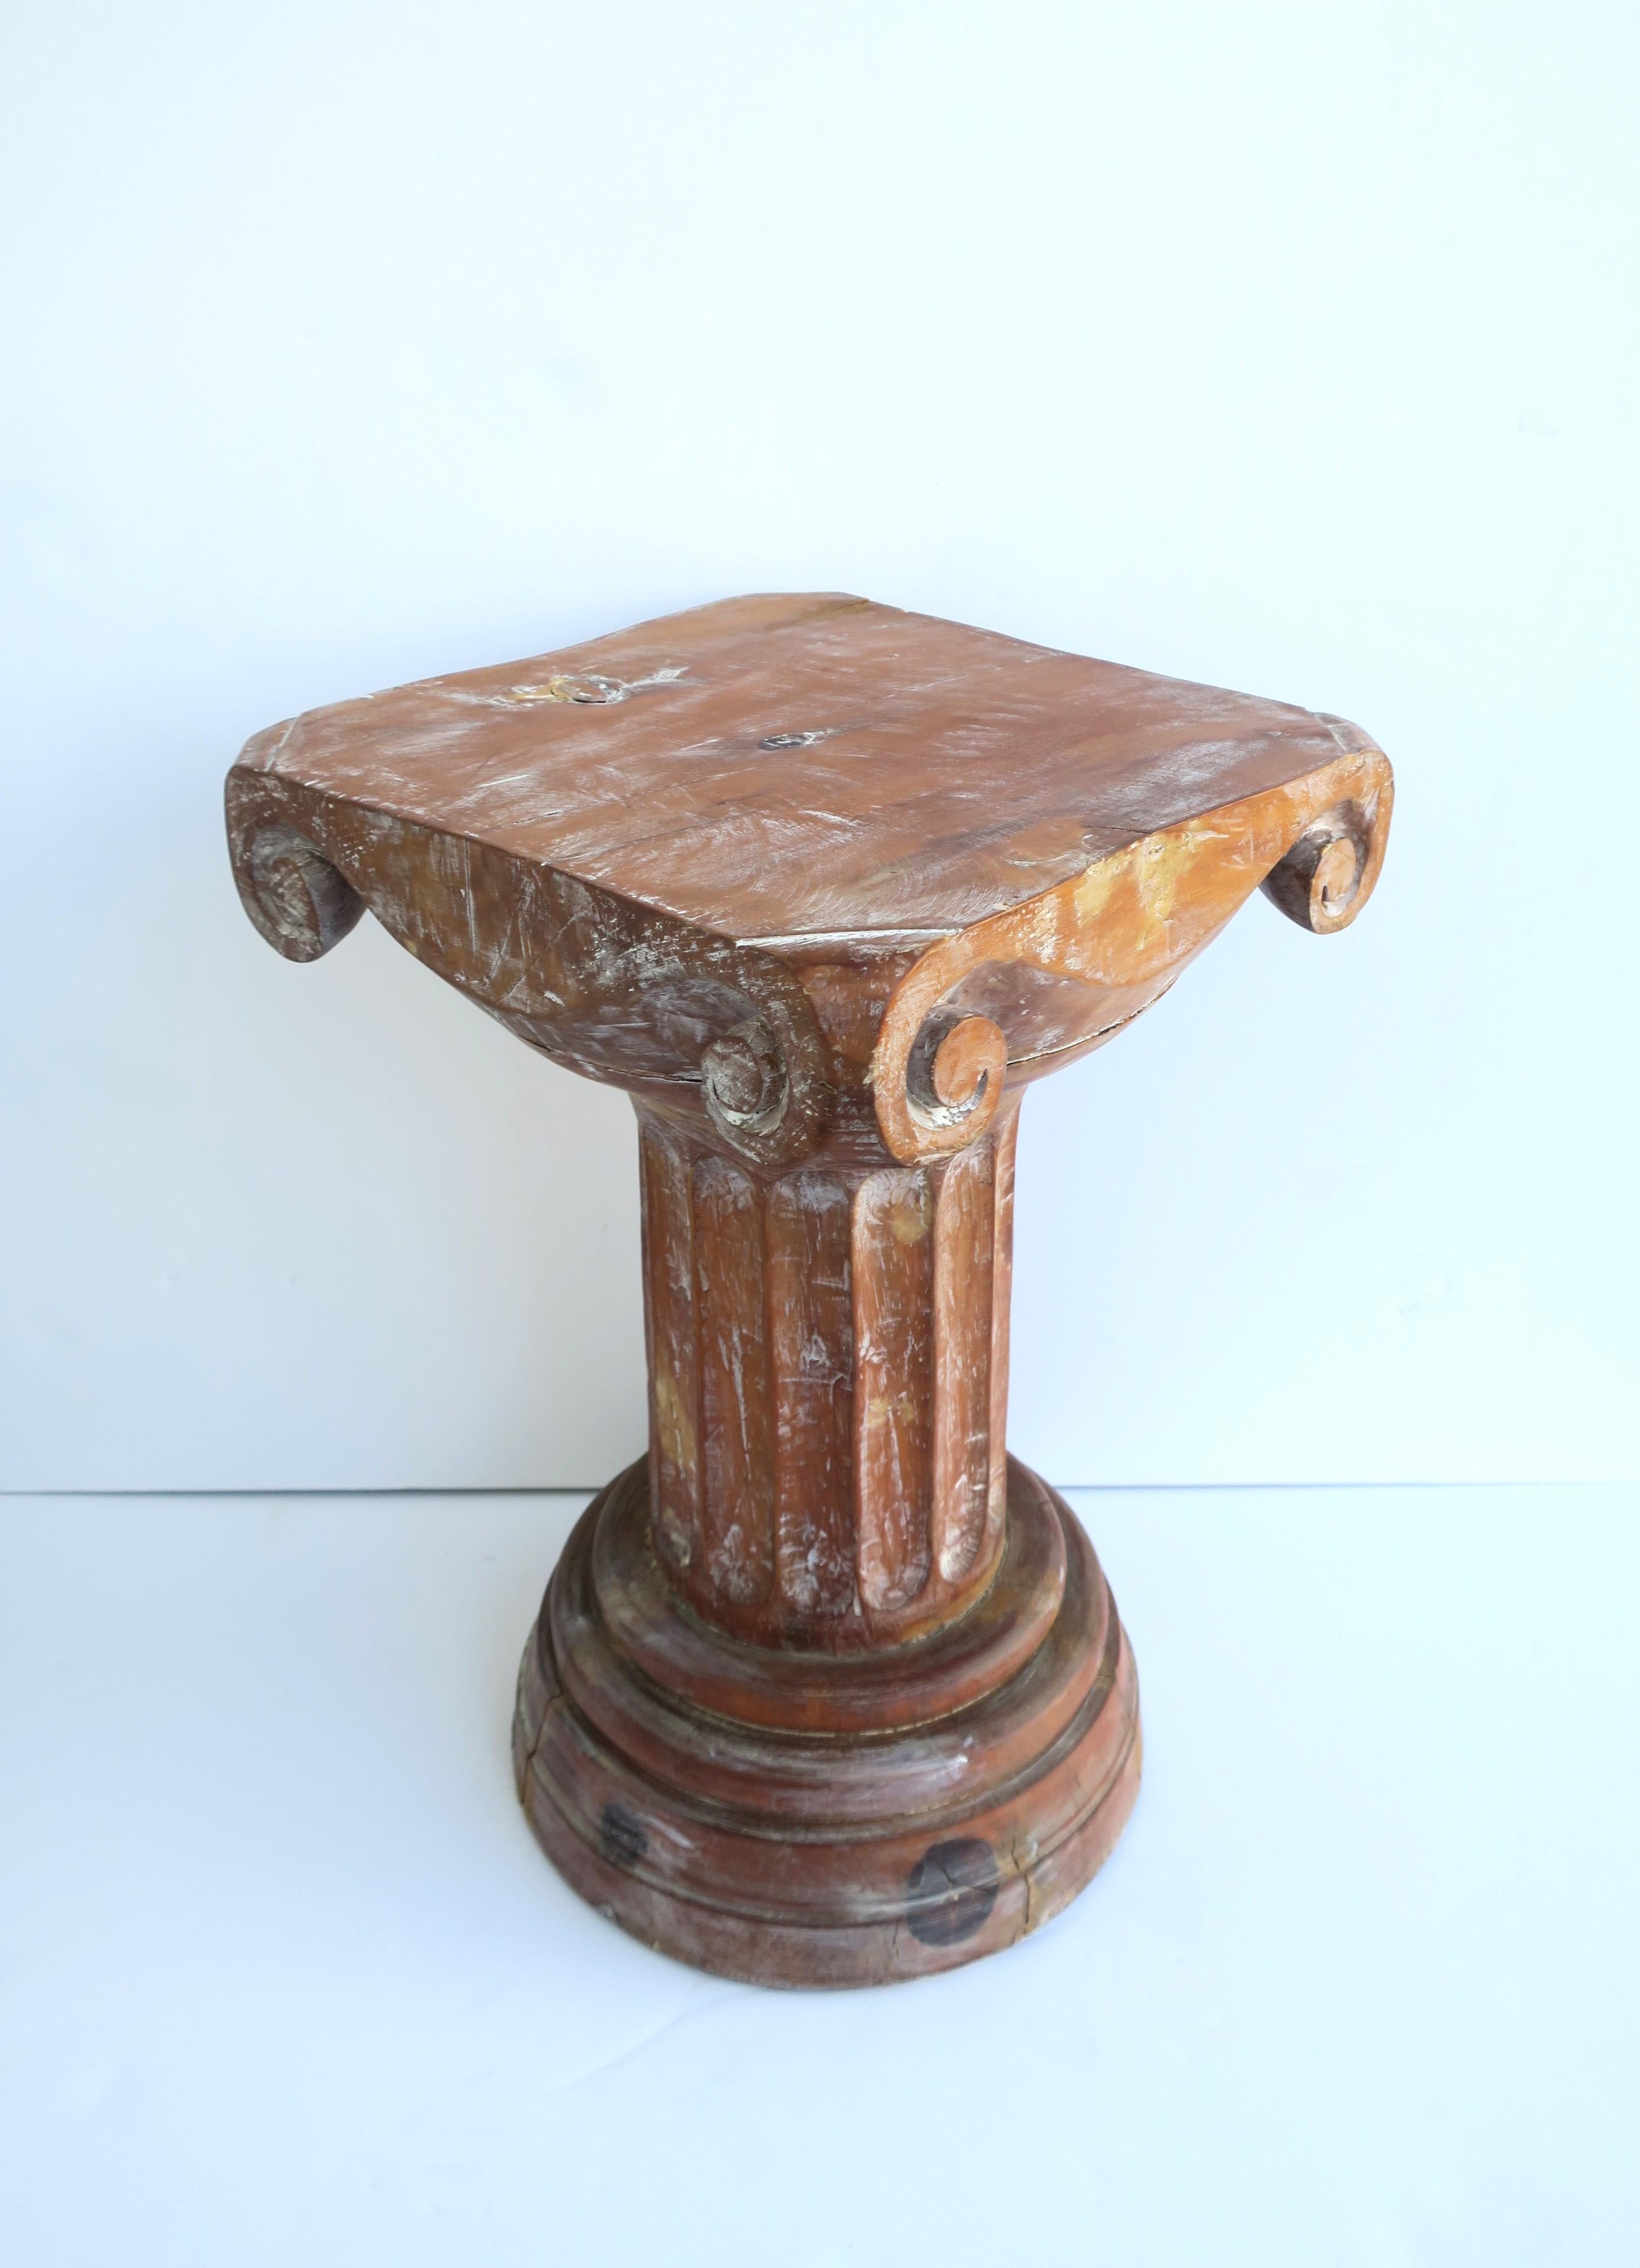 Wood Column Pedestal Table Neoclassical for Sculpture or Cocktail For Sale 5